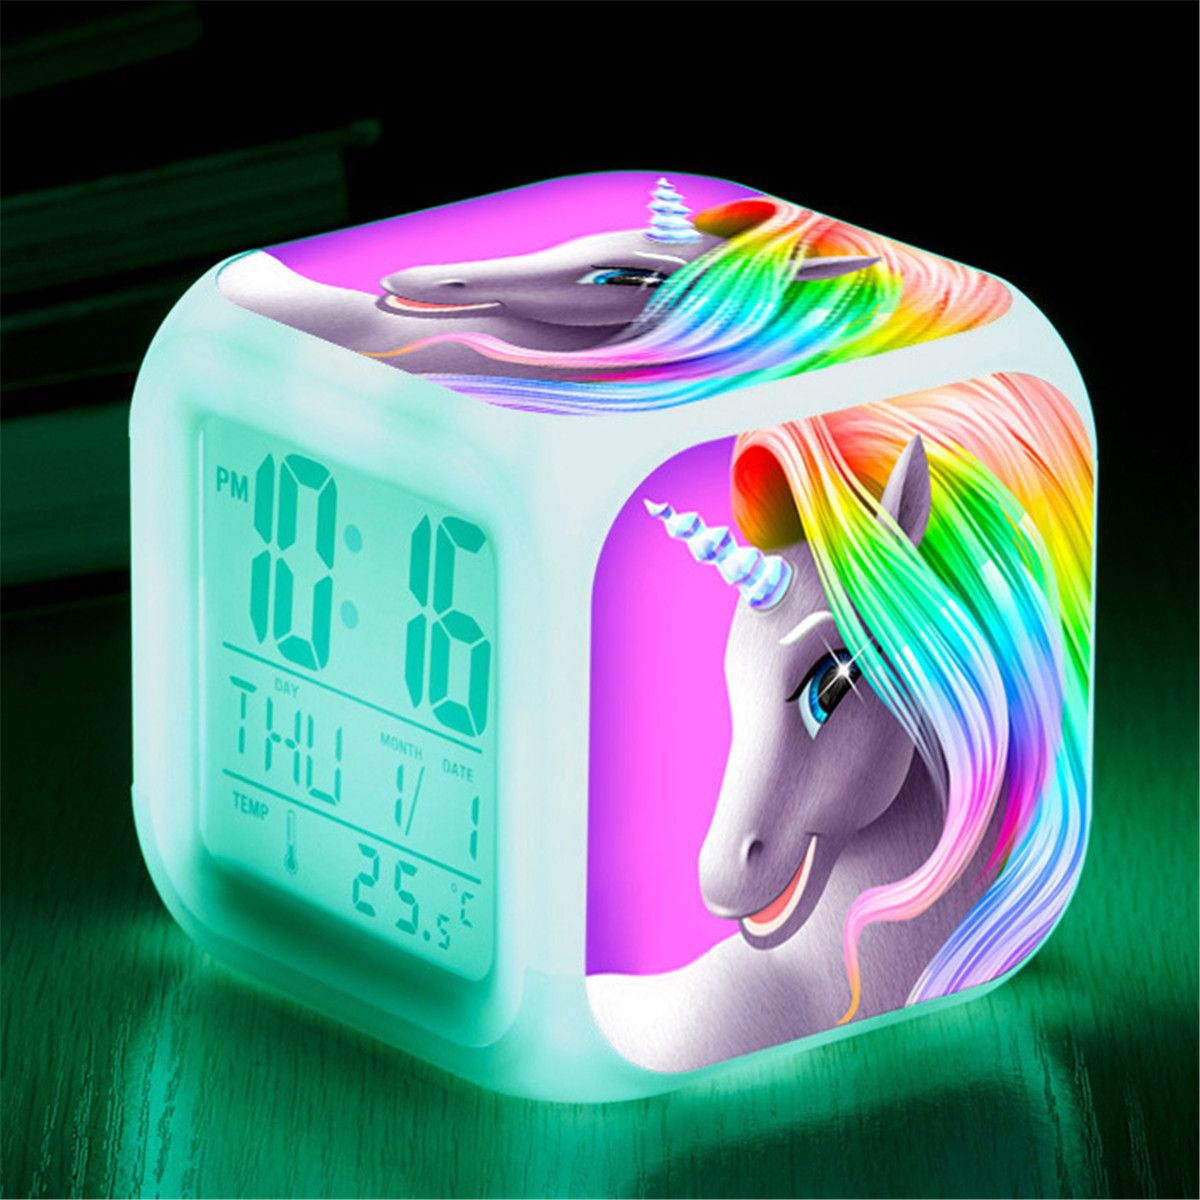 7-Colors-Changing-Unicorn-LED-Digital-Alarm-Clock-Thermometer-Date-Time-1631833